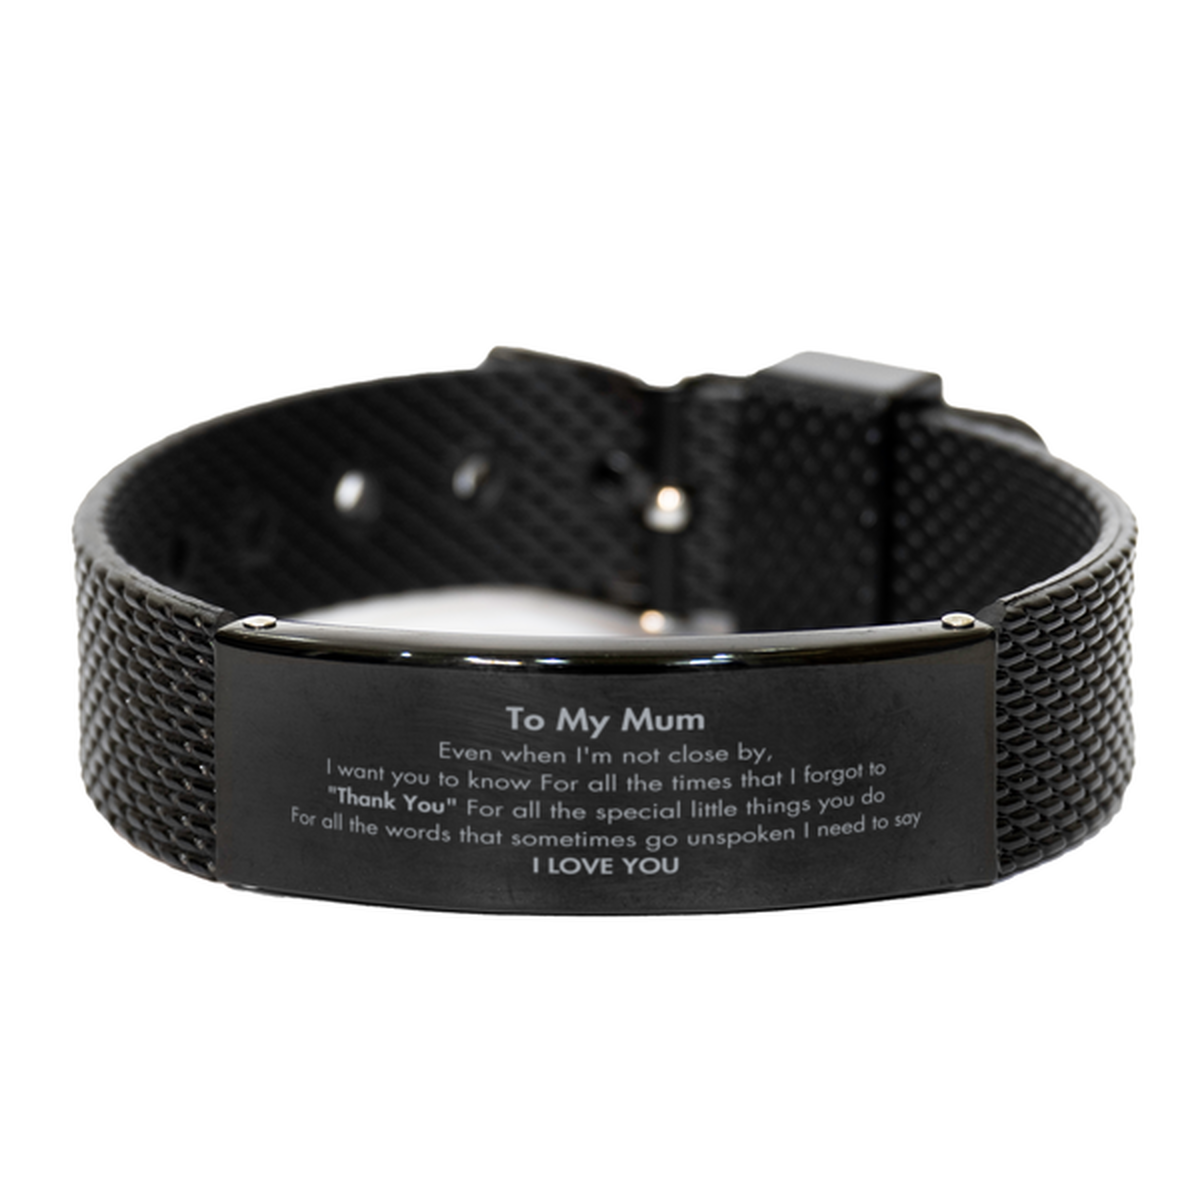 Thank You Gifts for Mum, Keepsake Black Shark Mesh Bracelet Gifts for Mum Birthday Mother's day Father's Day Mum For all the words That sometimes go unspoken I need to say I LOVE YOU